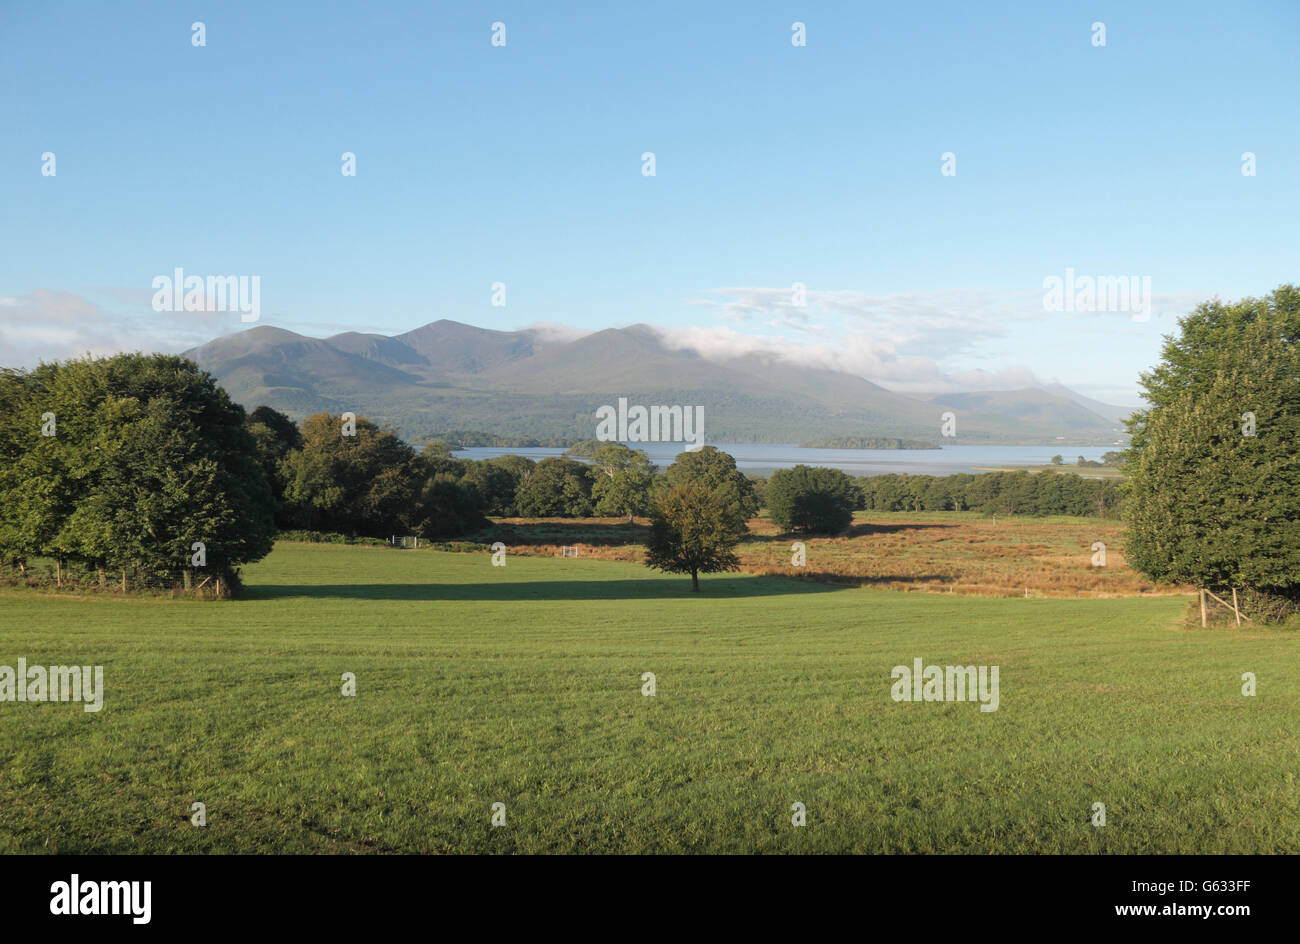 Stunning views of the hills and lakes (Lough Leane from The Demesne) of Killarney National Park, Co. Kerry, Ireland. Stock Photo